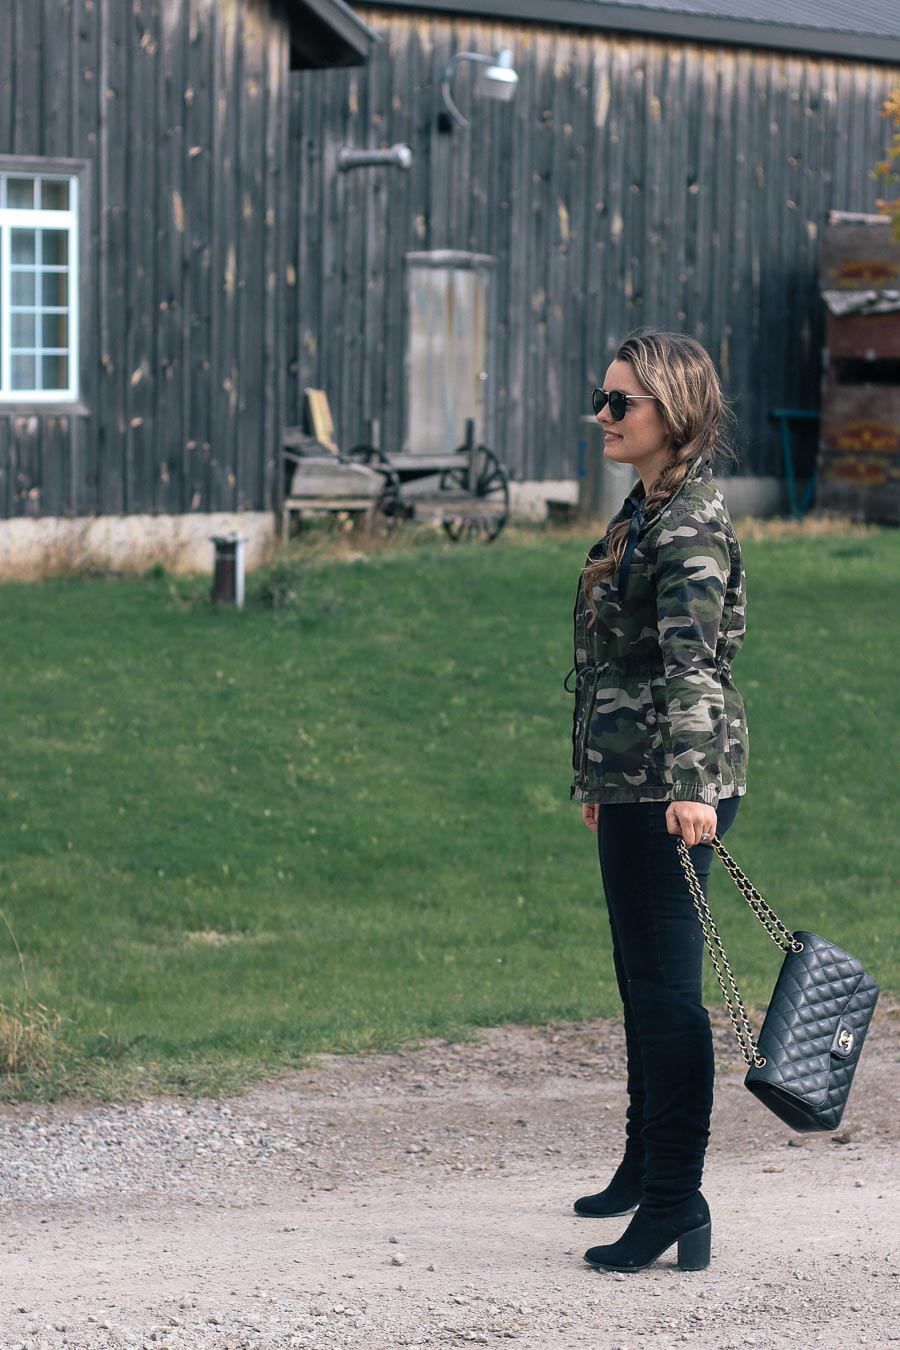 Fall-Outfit-Ideas-Black-Jeans-Boots-Camouflage-Jacket - A Side Of Style